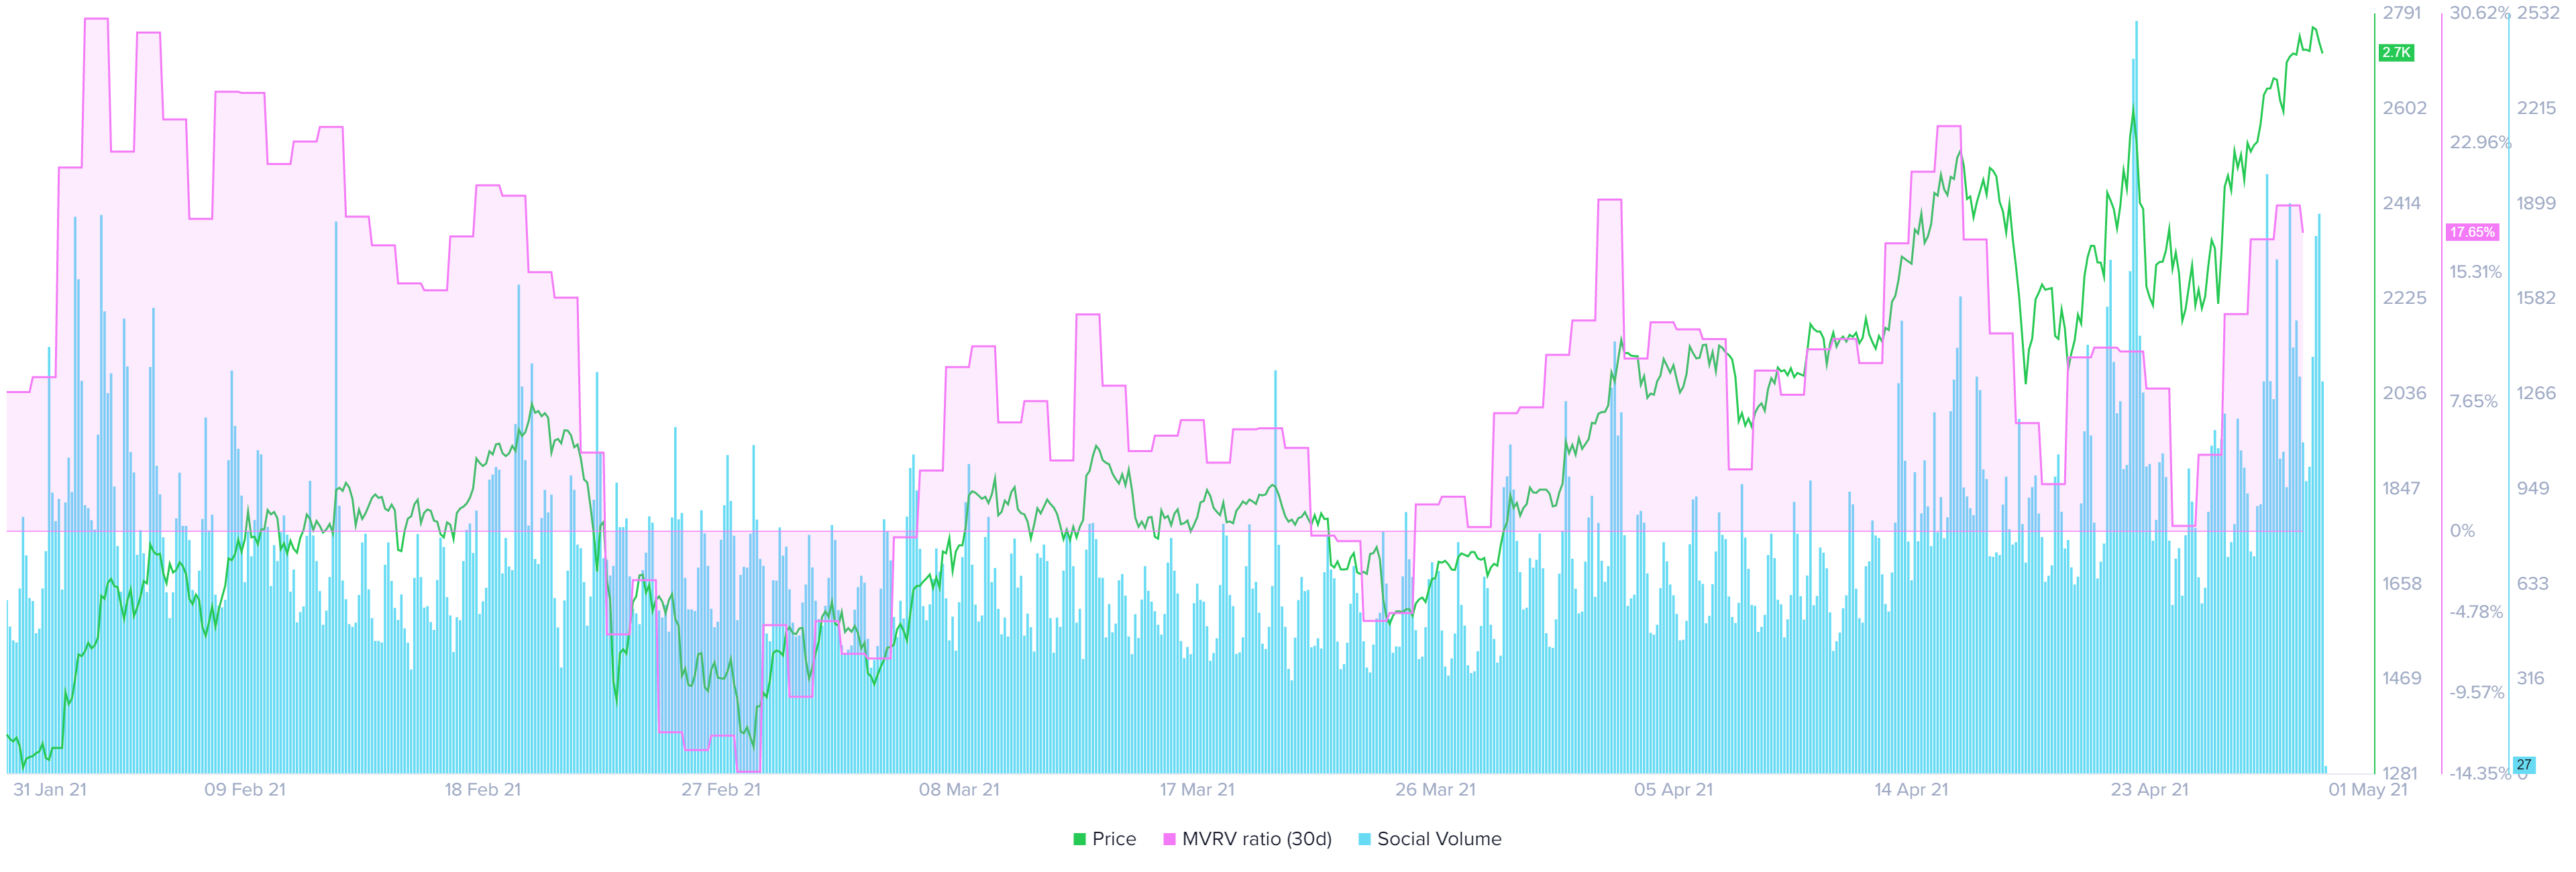 ETH 30-day MVRV and social volume chart